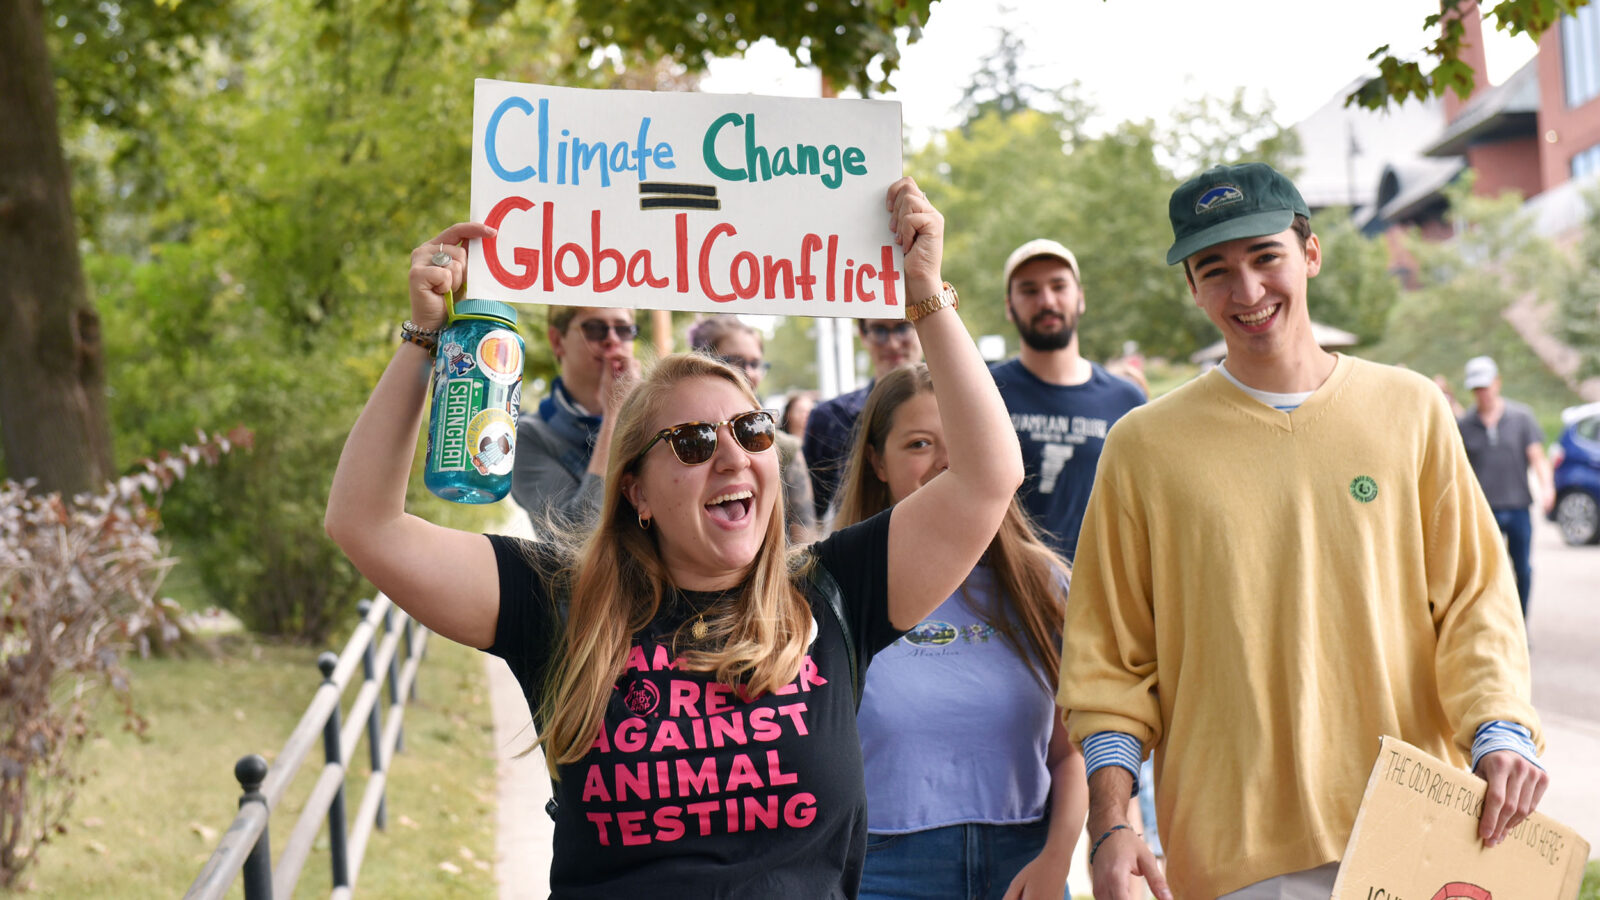 students marching through burlington rallying for climate change with signs